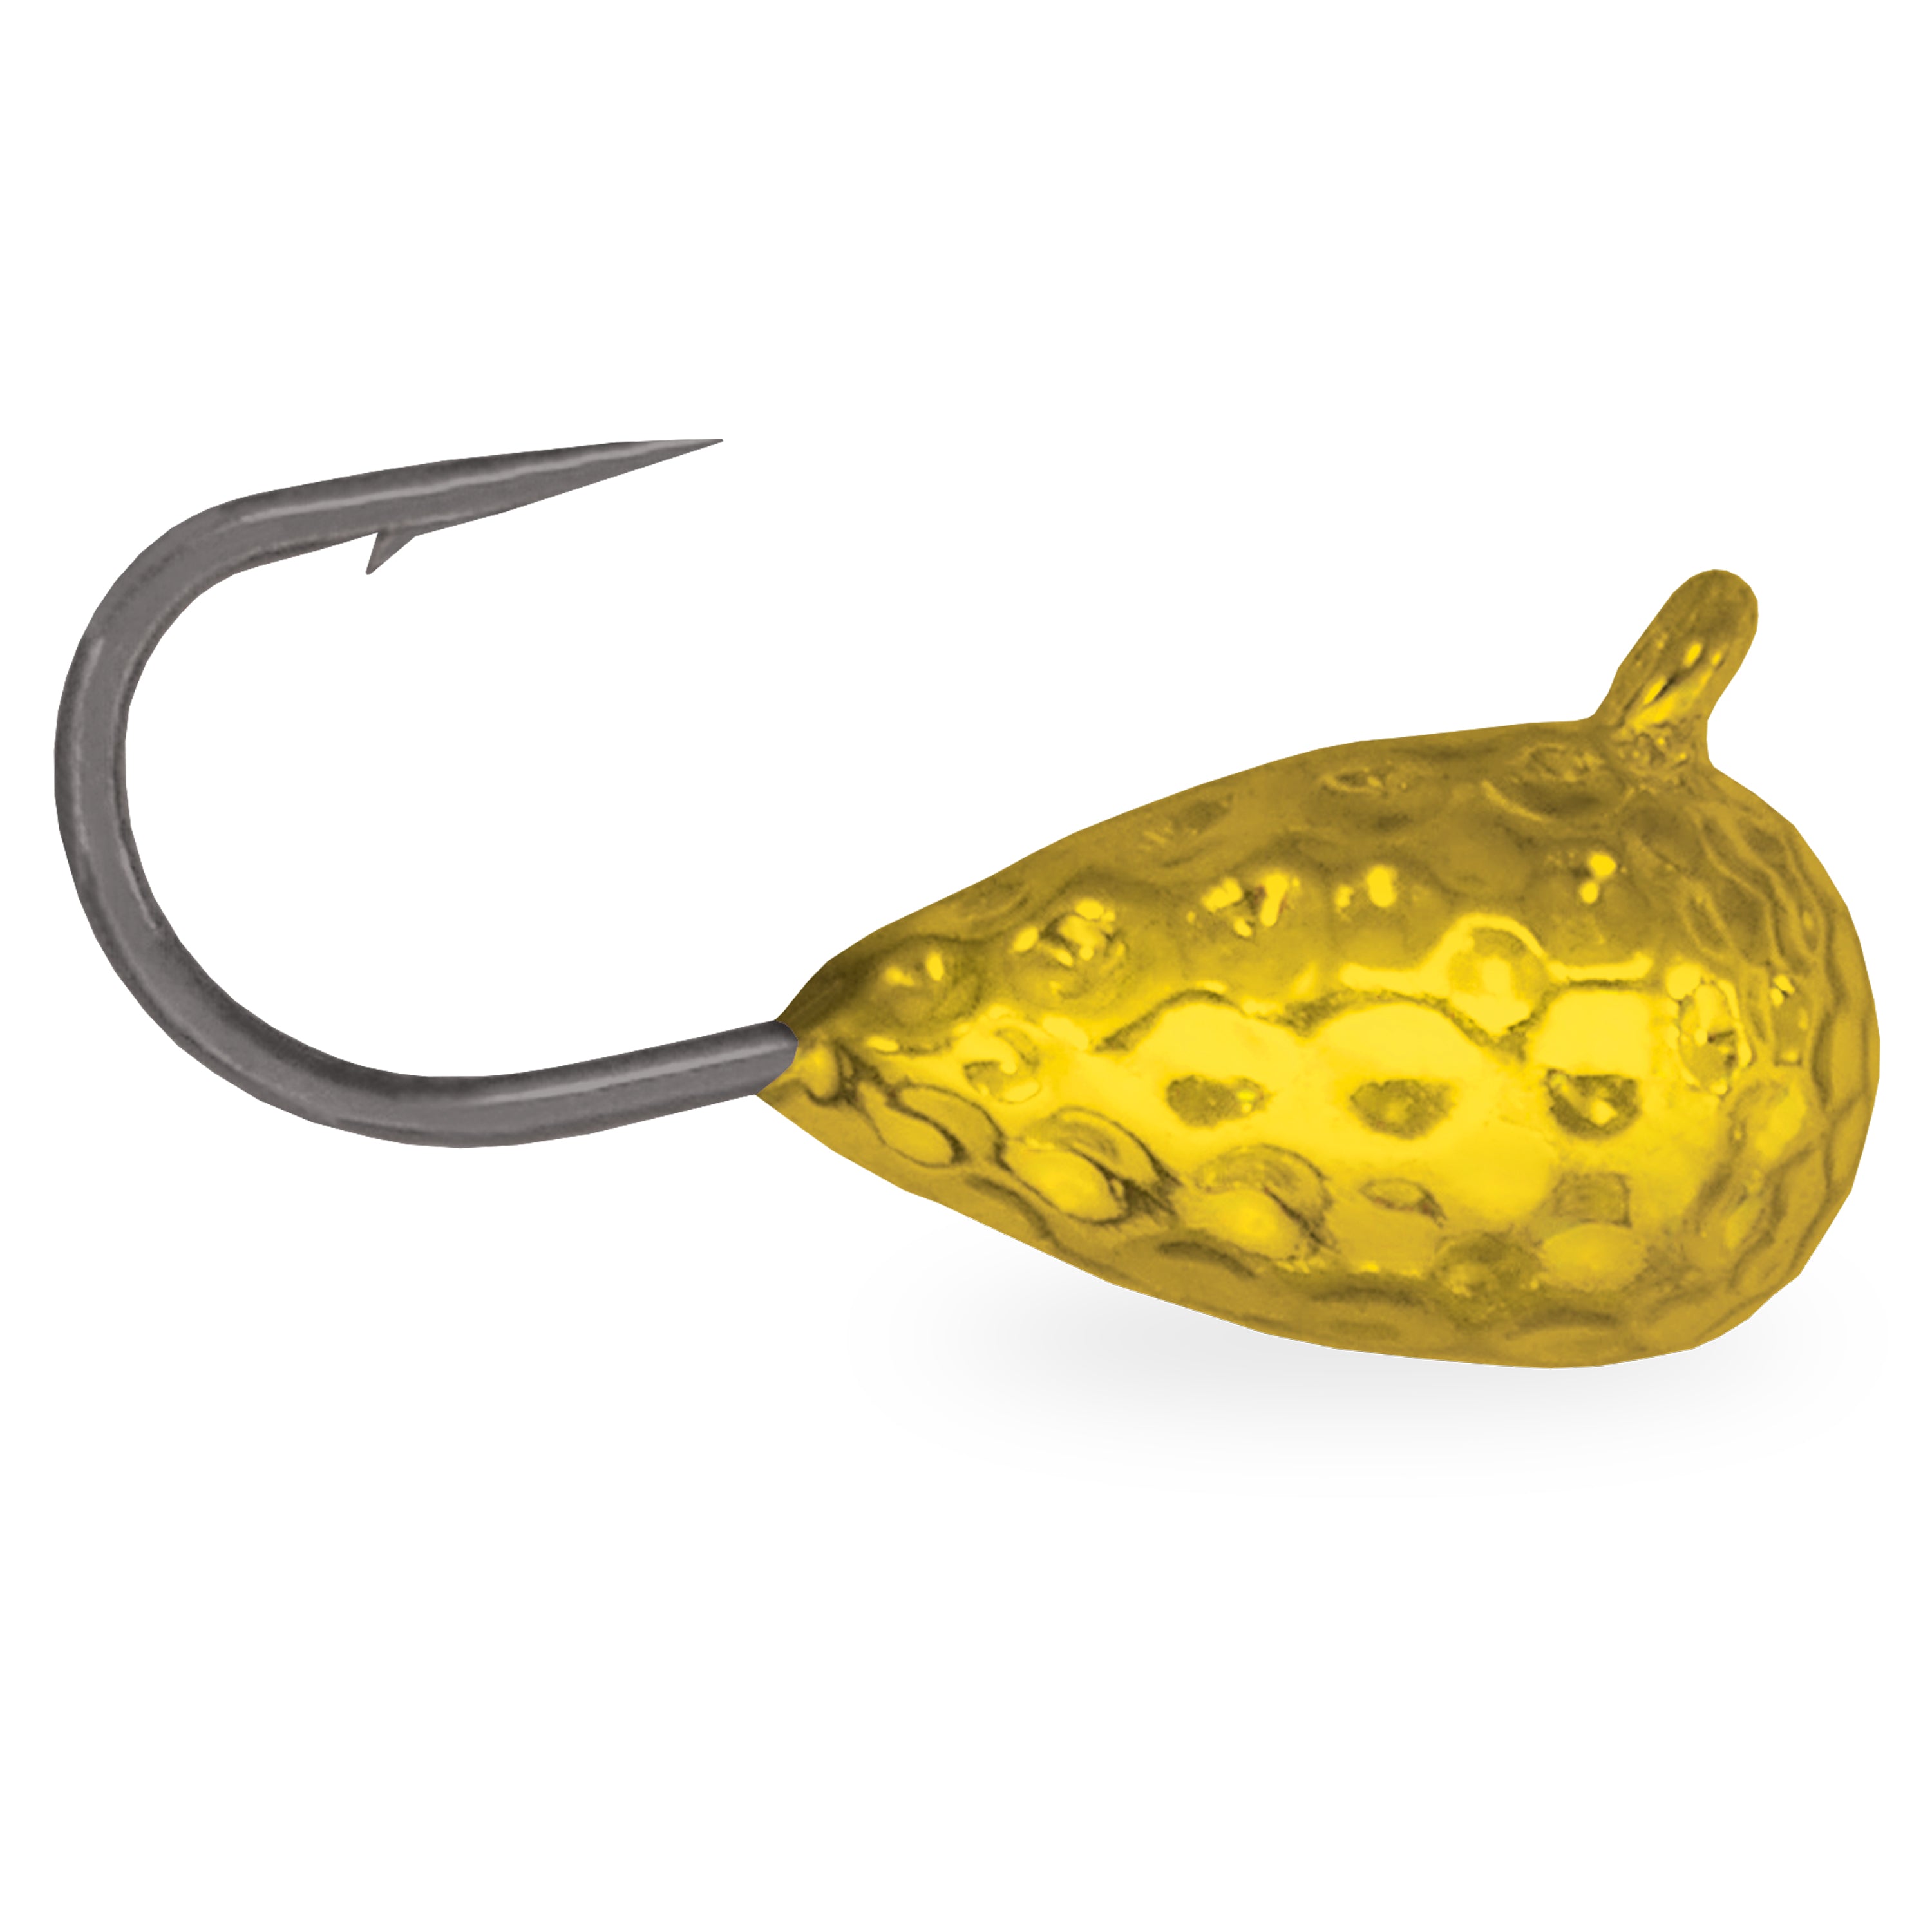 Acme Tackle - Hammered Tungsten Ice Jigs (2 Pack) - Acme Tackle